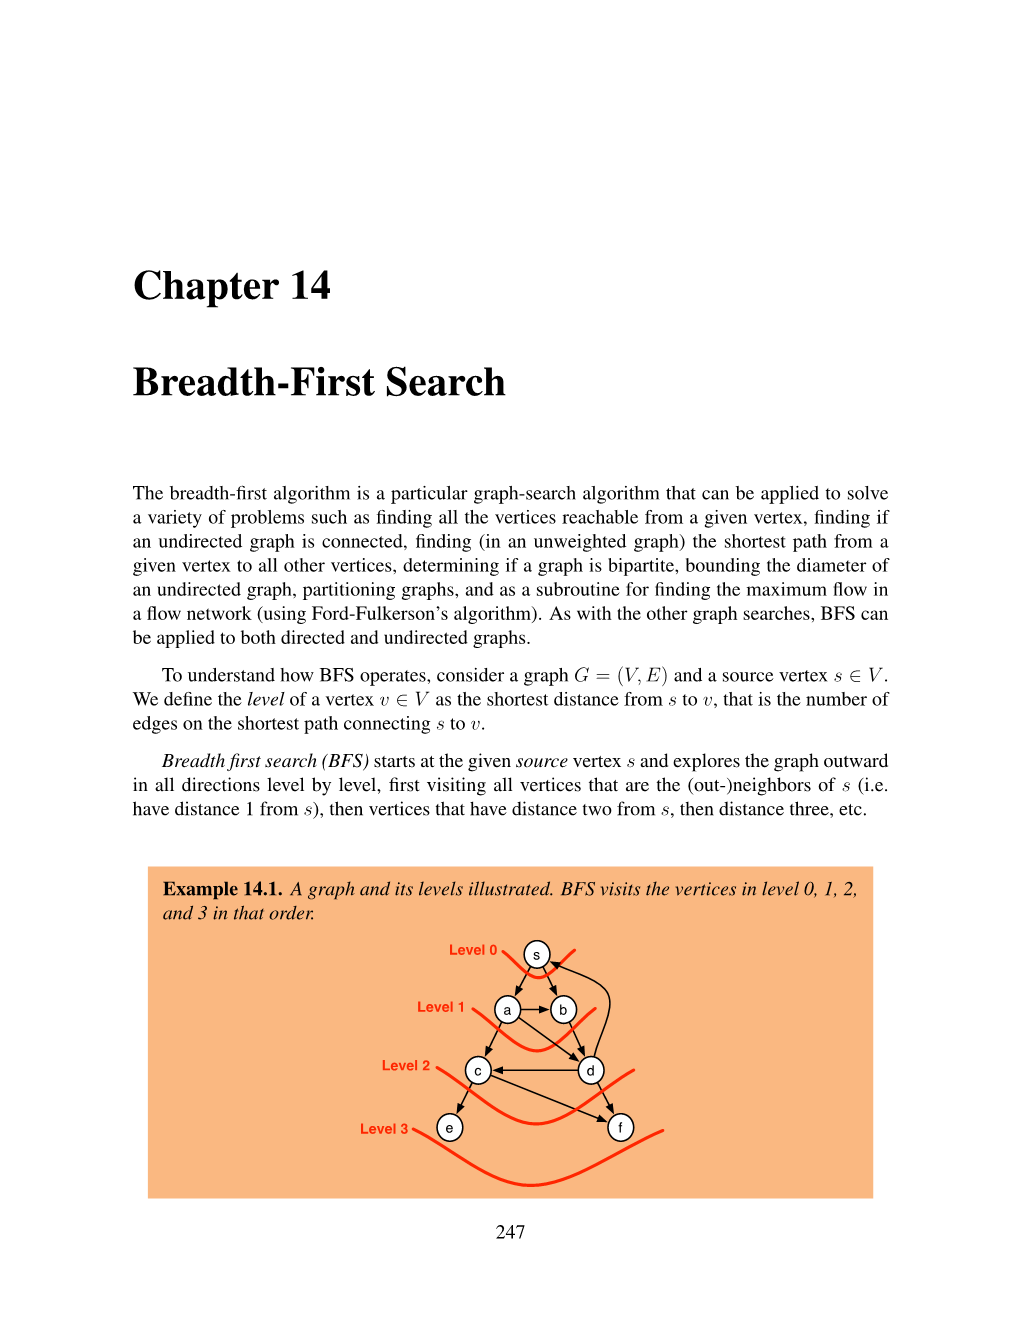 Chapter 14 Breadth-First Search